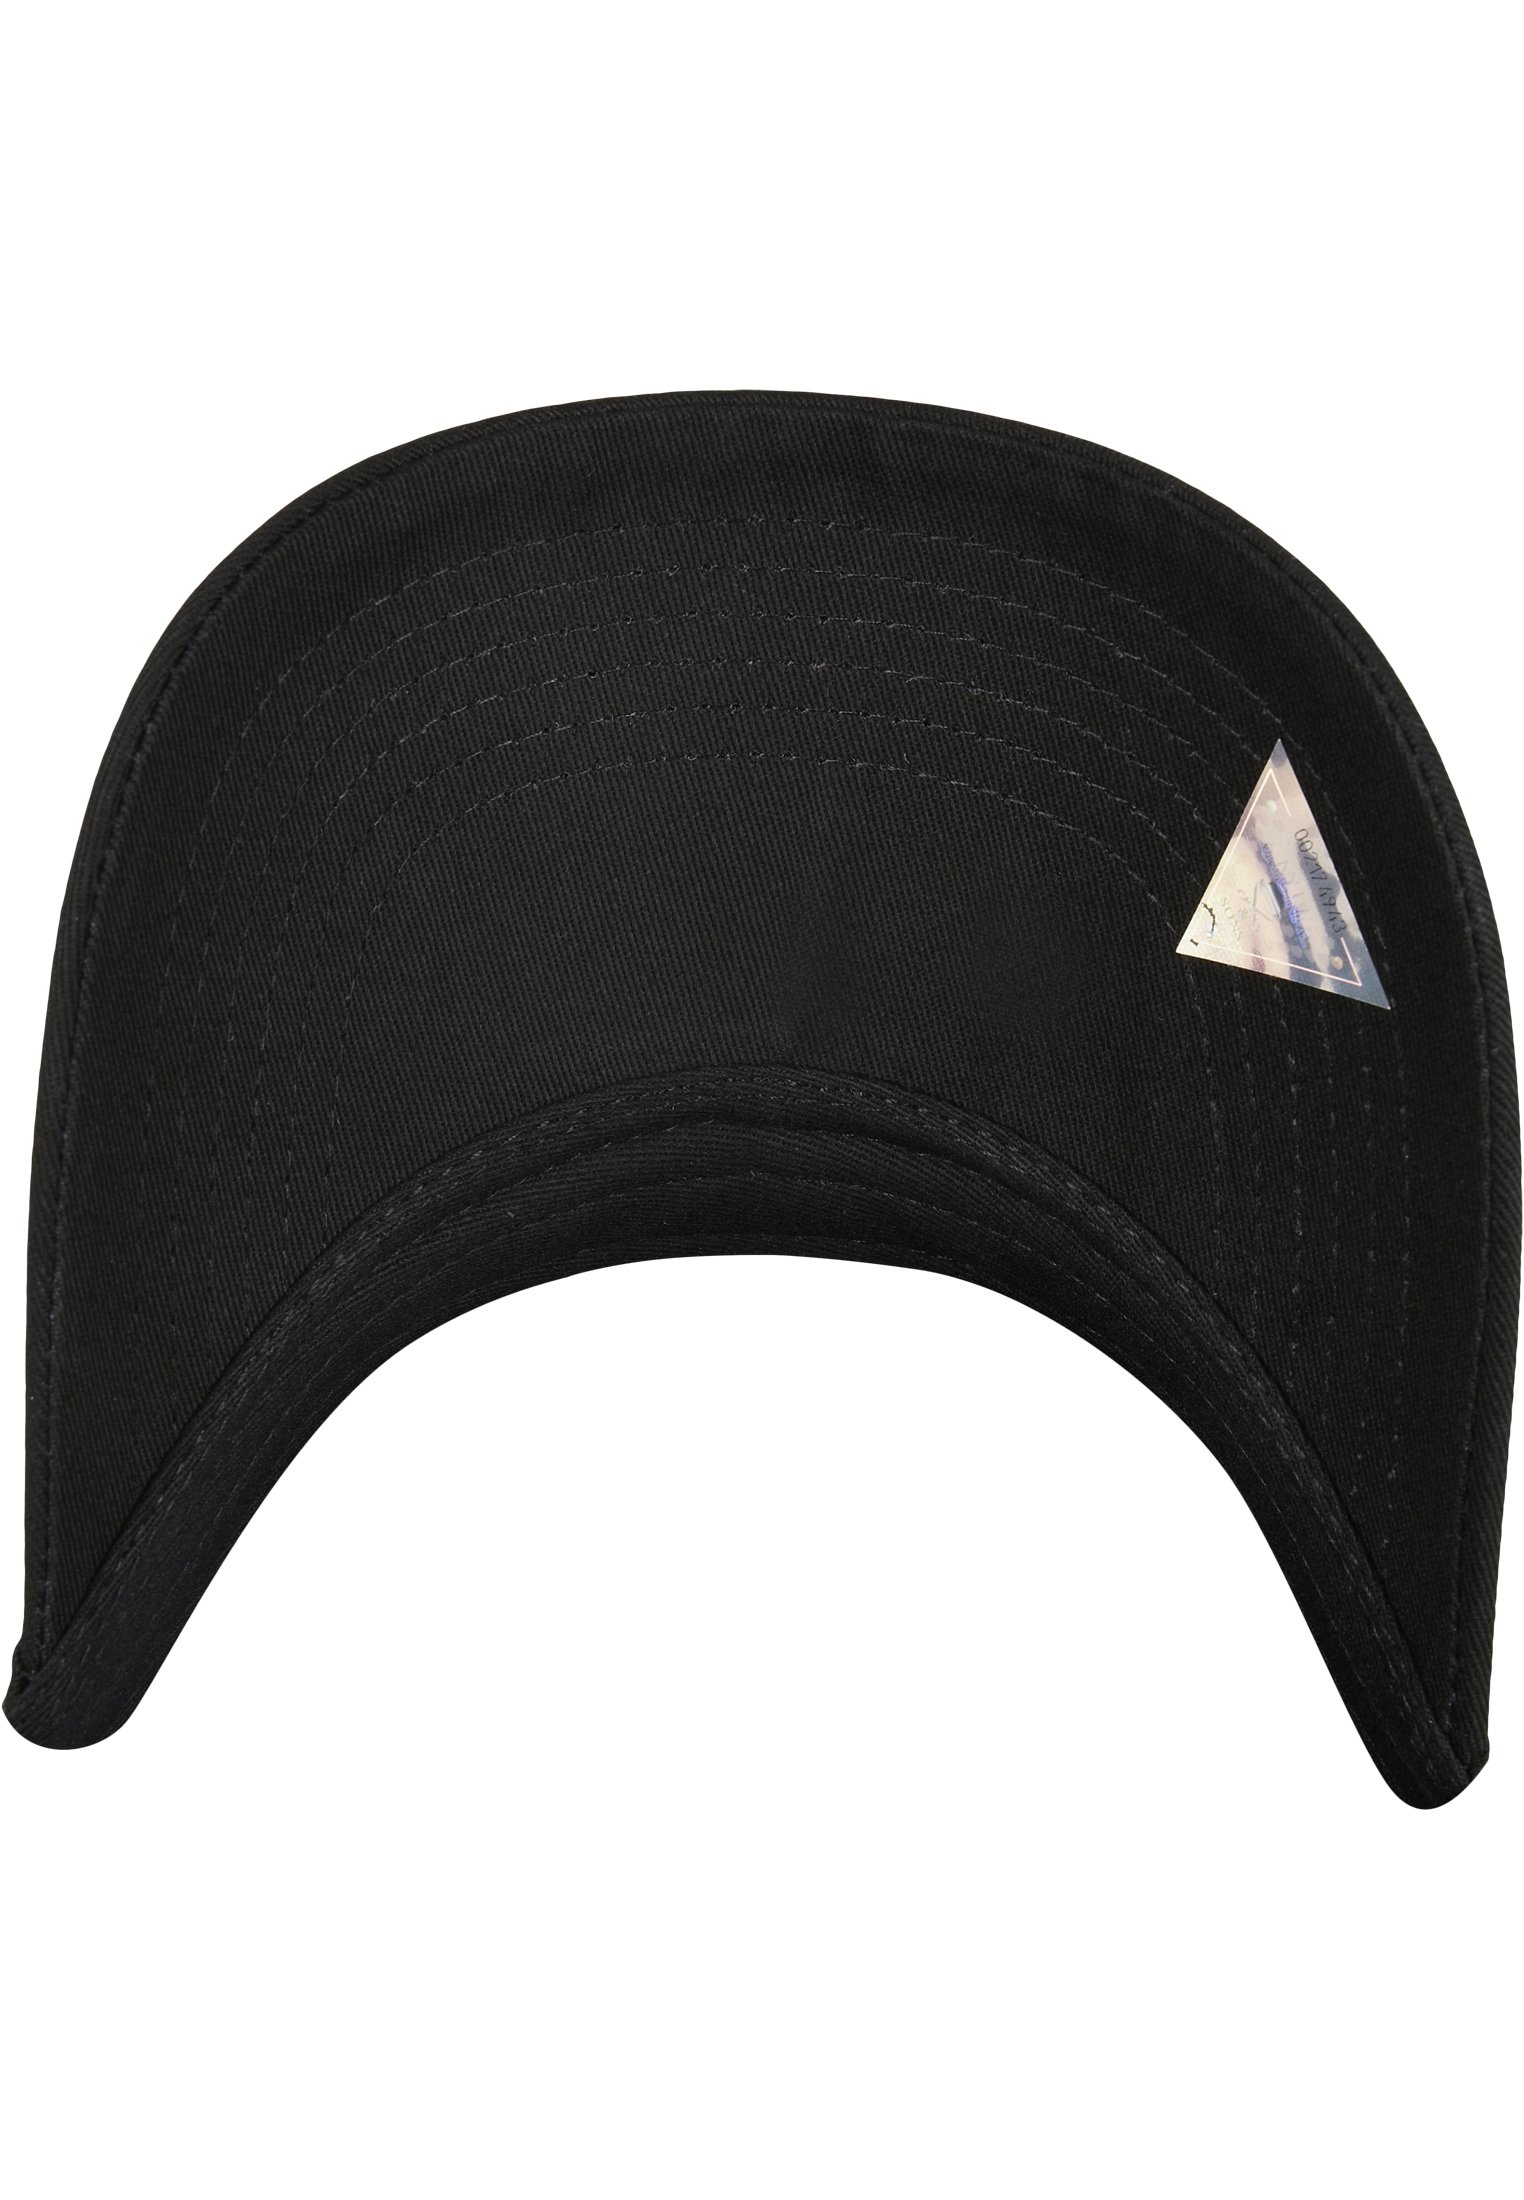 C&S WL Earn Respect Curved Cap black/mc one size